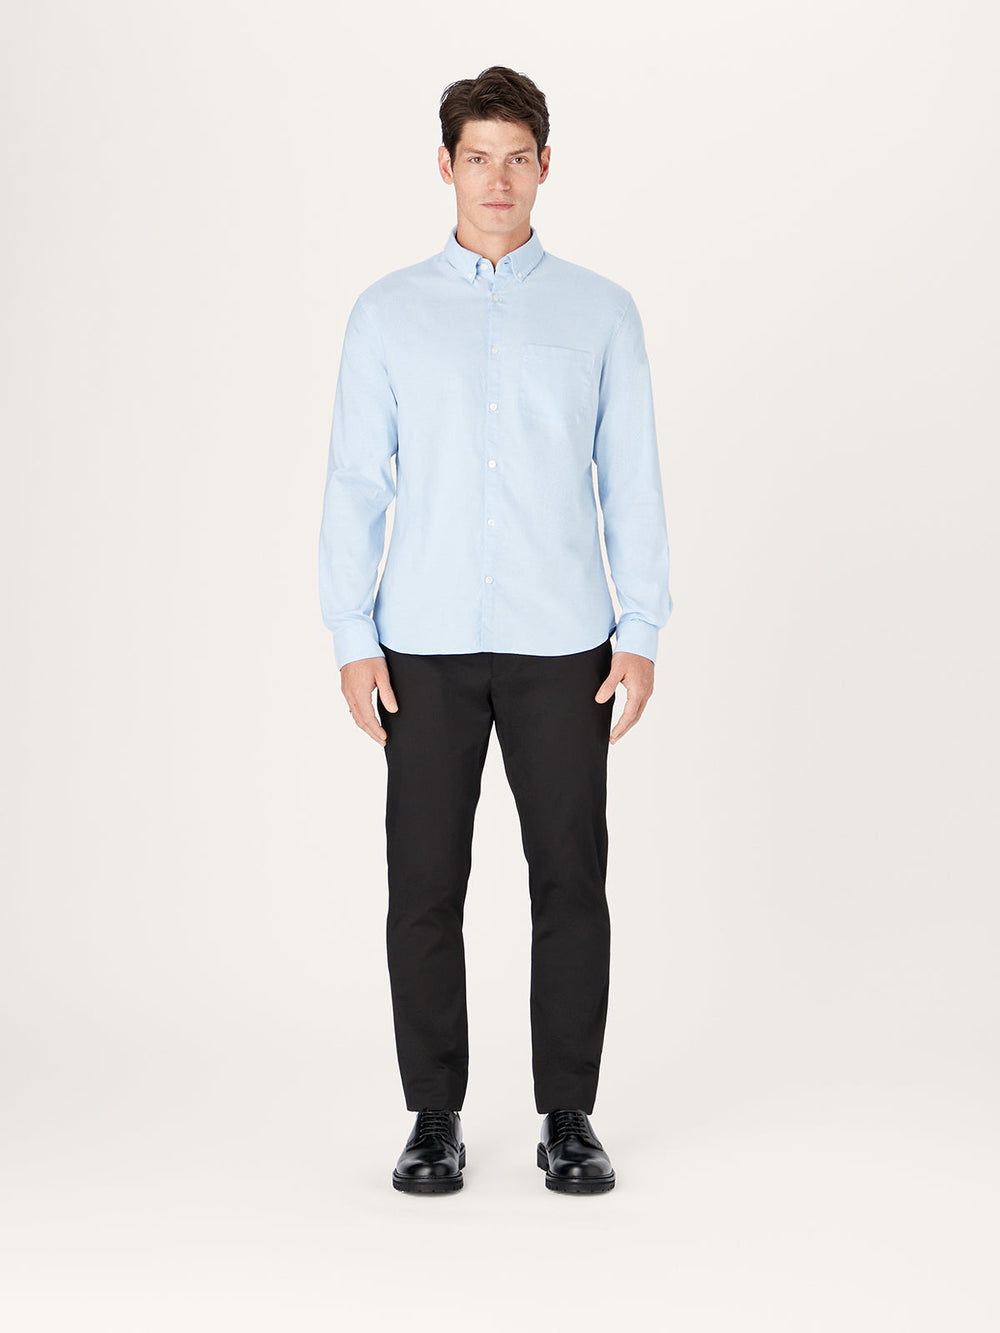 The All Day Oxford Shirt || Light-Blue | Stretch Cotton